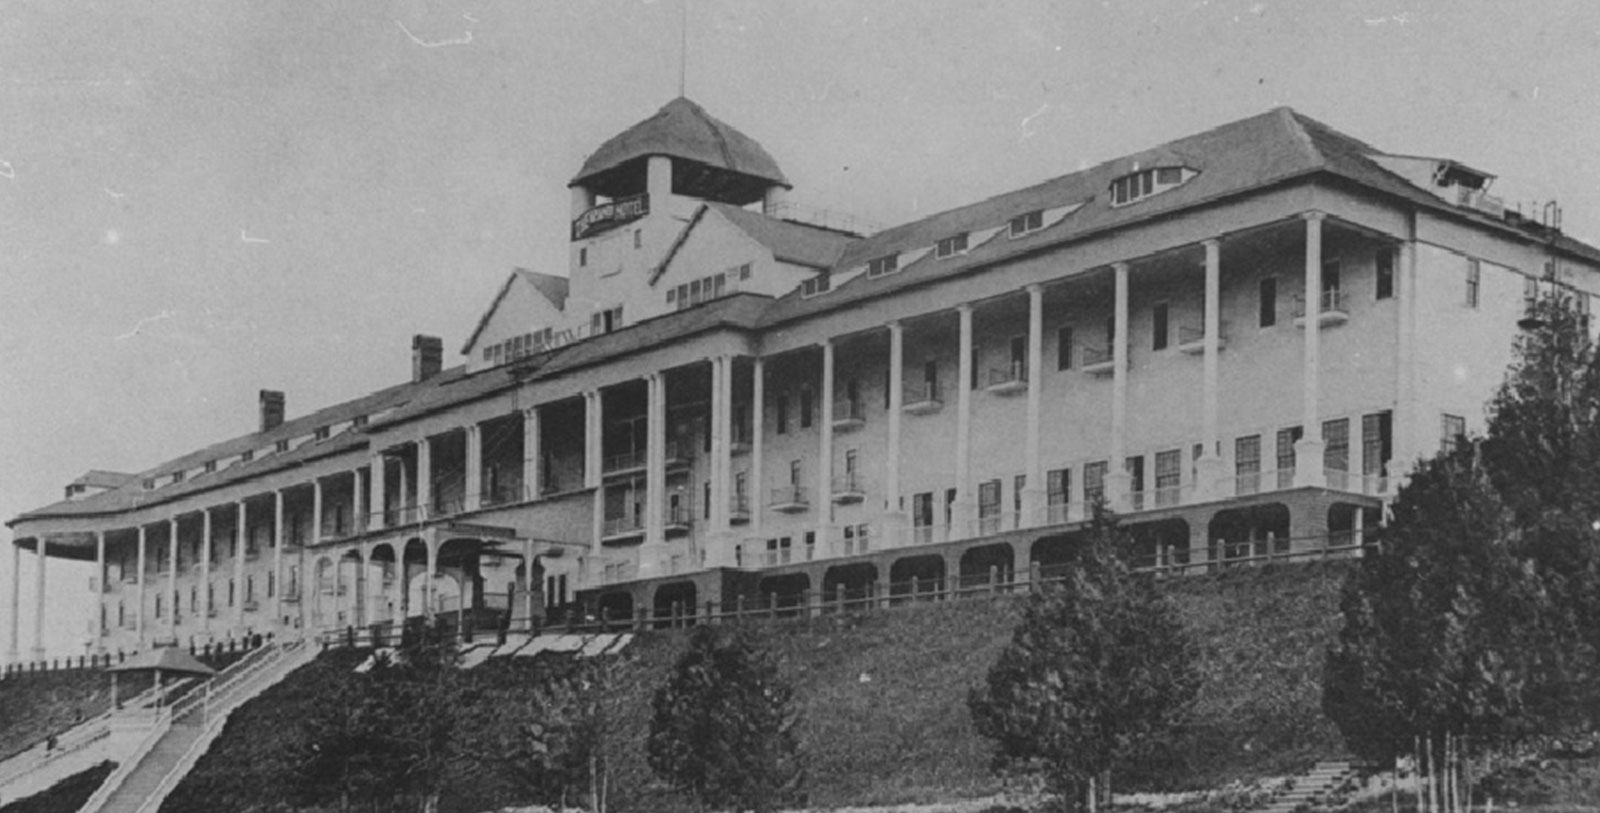 Historical Image of Exterior, Grand Hotel, 1887, Member of Historic Hotels of America, in Mackinac Island, Michigan, History.